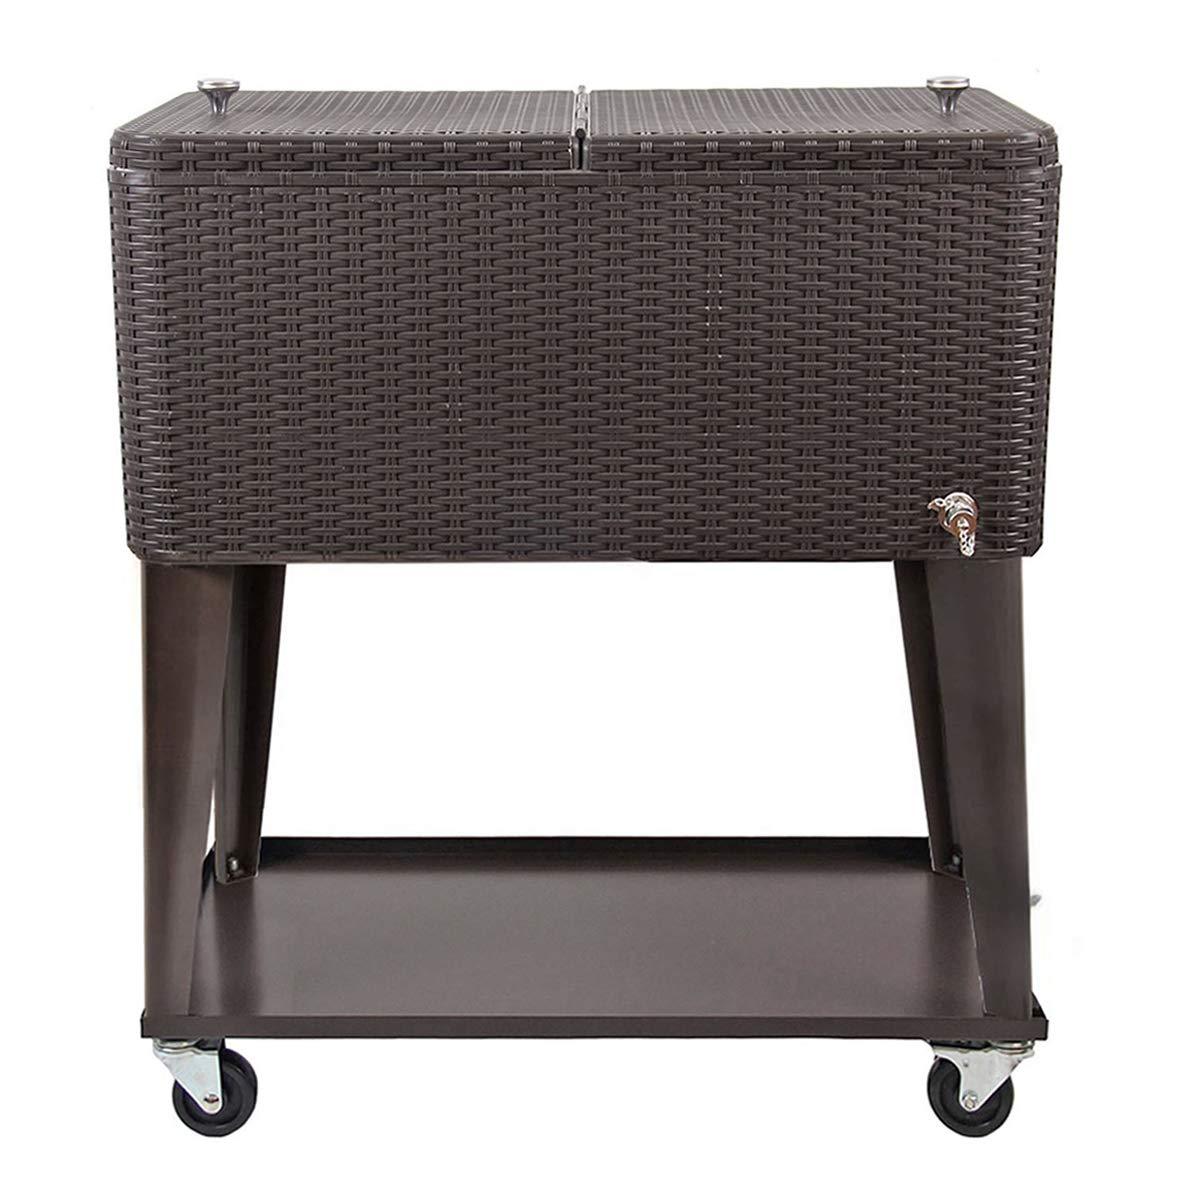 80 Quart Qt Rolling Cooler Ice Chest Cart for Outdoor Patio Deck Party, Dark Brown Wicker Faux Rattan Tub Trolley, Portable Backyard Party Drink Beverage Bar, Wheels with Shelf & Bottle Opener - CookCave